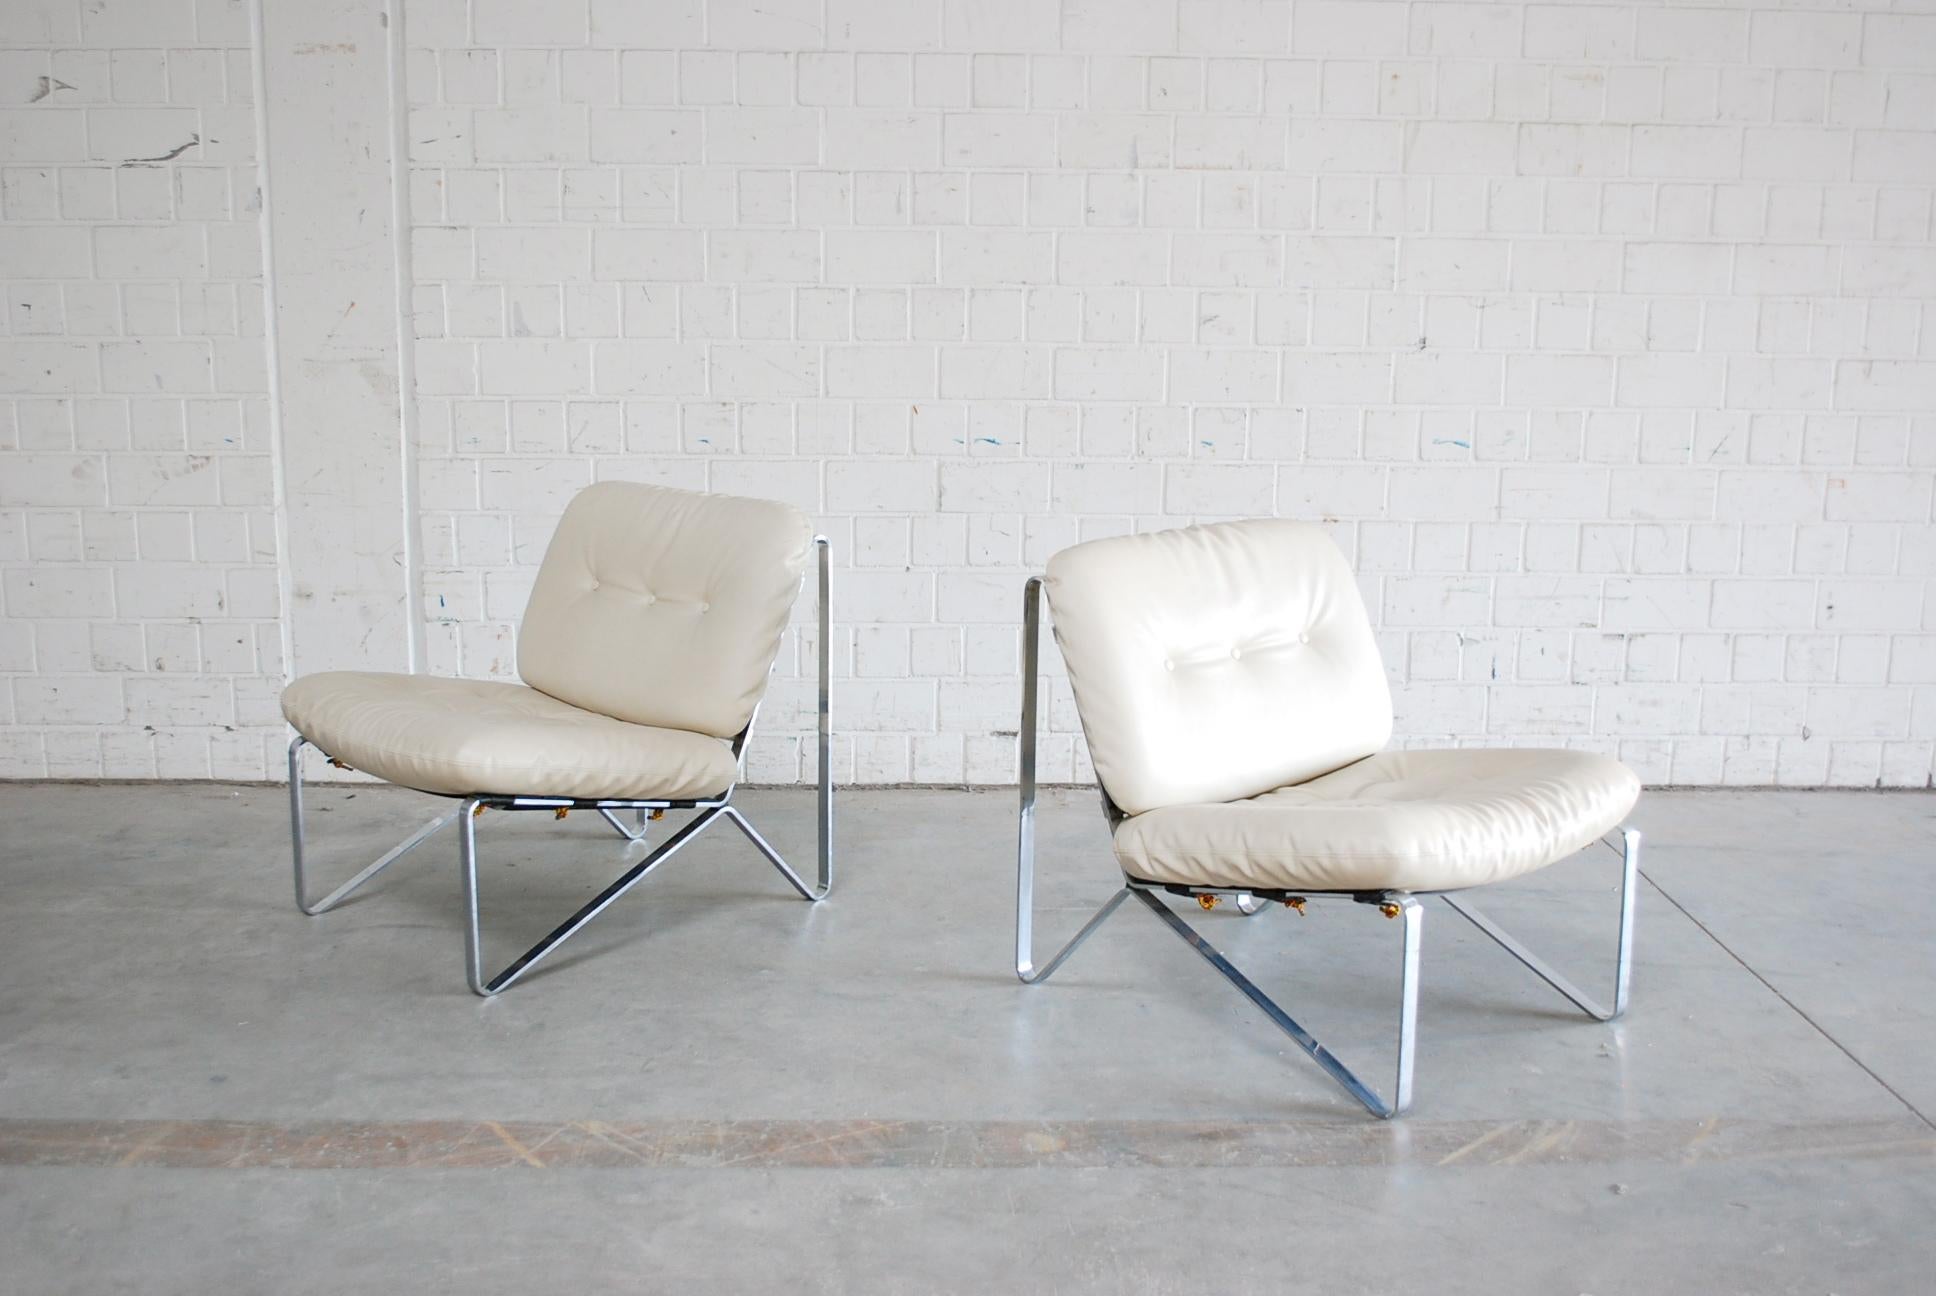 This set of two armchairs was designed by Hartmut Lohmeyer in 1960s and manufactured by German manufacture Mauser Werke Waldeck.
Rare and hard to find.
They feature chromed steel frames and skai leather upholstery.